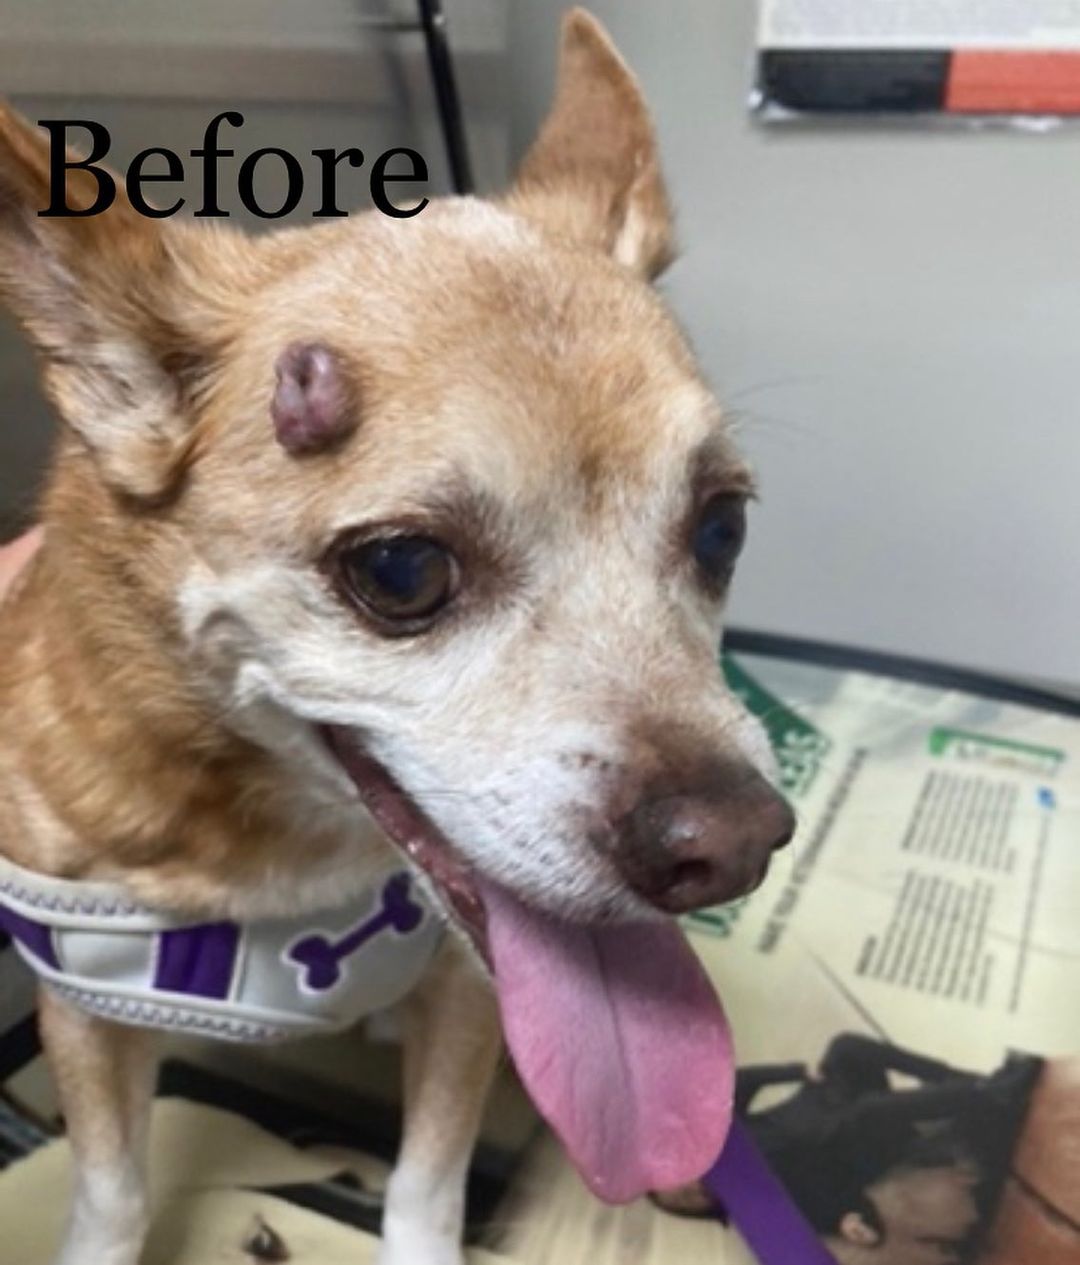 GOOD NEWS 🎉

Our seniors, Peluza and Snickers, are doing well. ❤️ They have both been eating and are in great spirits .💕

Snickers’ non-malignant tumor was removed from his forehead and the fatty growth from his chest was also removed. 🙏🏻 If you thought he was handsome before, wait til you see him now! 😍What a beautiful boy we have here! 👏

Peluza is back to her usual self, tattling on all her ResQue brothers and sisters 🐶and reporting when anyone even moves. 🤣 She is also doing her regular rounds 🐾of the kitchen and dining room, in case any human want to give her a bite 🥪🍔🥗🥙of what they’re eating (they usually do 😂). 

As always, we thank you so much 🙏🏻for helping us help these two seniors get the help they need❤️. Because of you, they are happy and healthy 💕 

<a target='_blank' href='https://www.instagram.com/explore/tags/thankyou/'>#thankyou</a> <a target='_blank' href='https://www.instagram.com/explore/tags/rescuedogs/'>#rescuedogs</a> <a target='_blank' href='https://www.instagram.com/explore/tags/seniordogs/'>#seniordogs</a> <a target='_blank' href='https://www.instagram.com/explore/tags/happyandhealthy/'>#happyandhealthy</a> <a target='_blank' href='https://www.instagram.com/explore/tags/doglove/'>#doglove</a> <a target='_blank' href='https://www.instagram.com/explore/tags/lovemydog/'>#lovemydog</a> <a target='_blank' href='https://www.instagram.com/explore/tags/whorescuedwho/'>#whorescuedwho</a> <a target='_blank' href='https://www.instagram.com/explore/tags/rescuedogsofinstagram/'>#rescuedogsofinstagram</a>